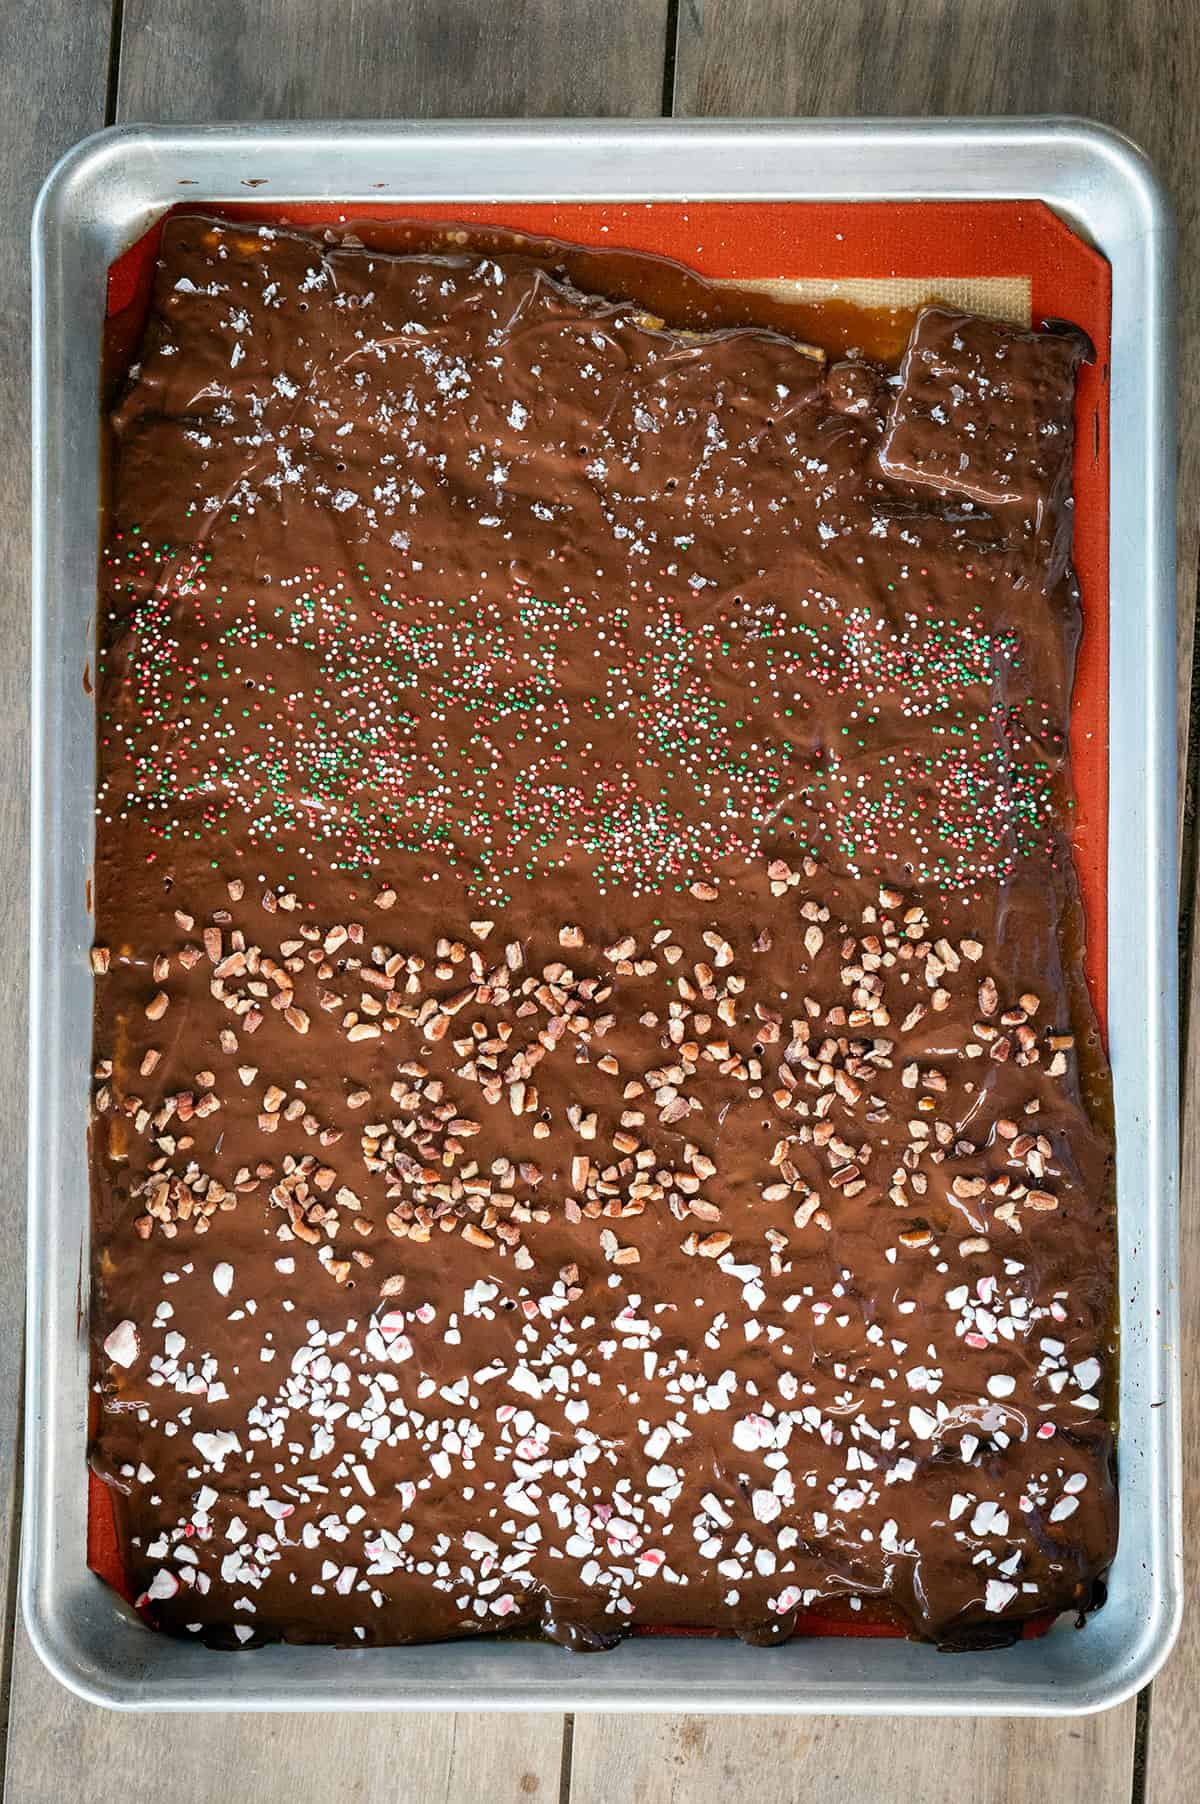 Pan of Christmas Crack with different toppings.